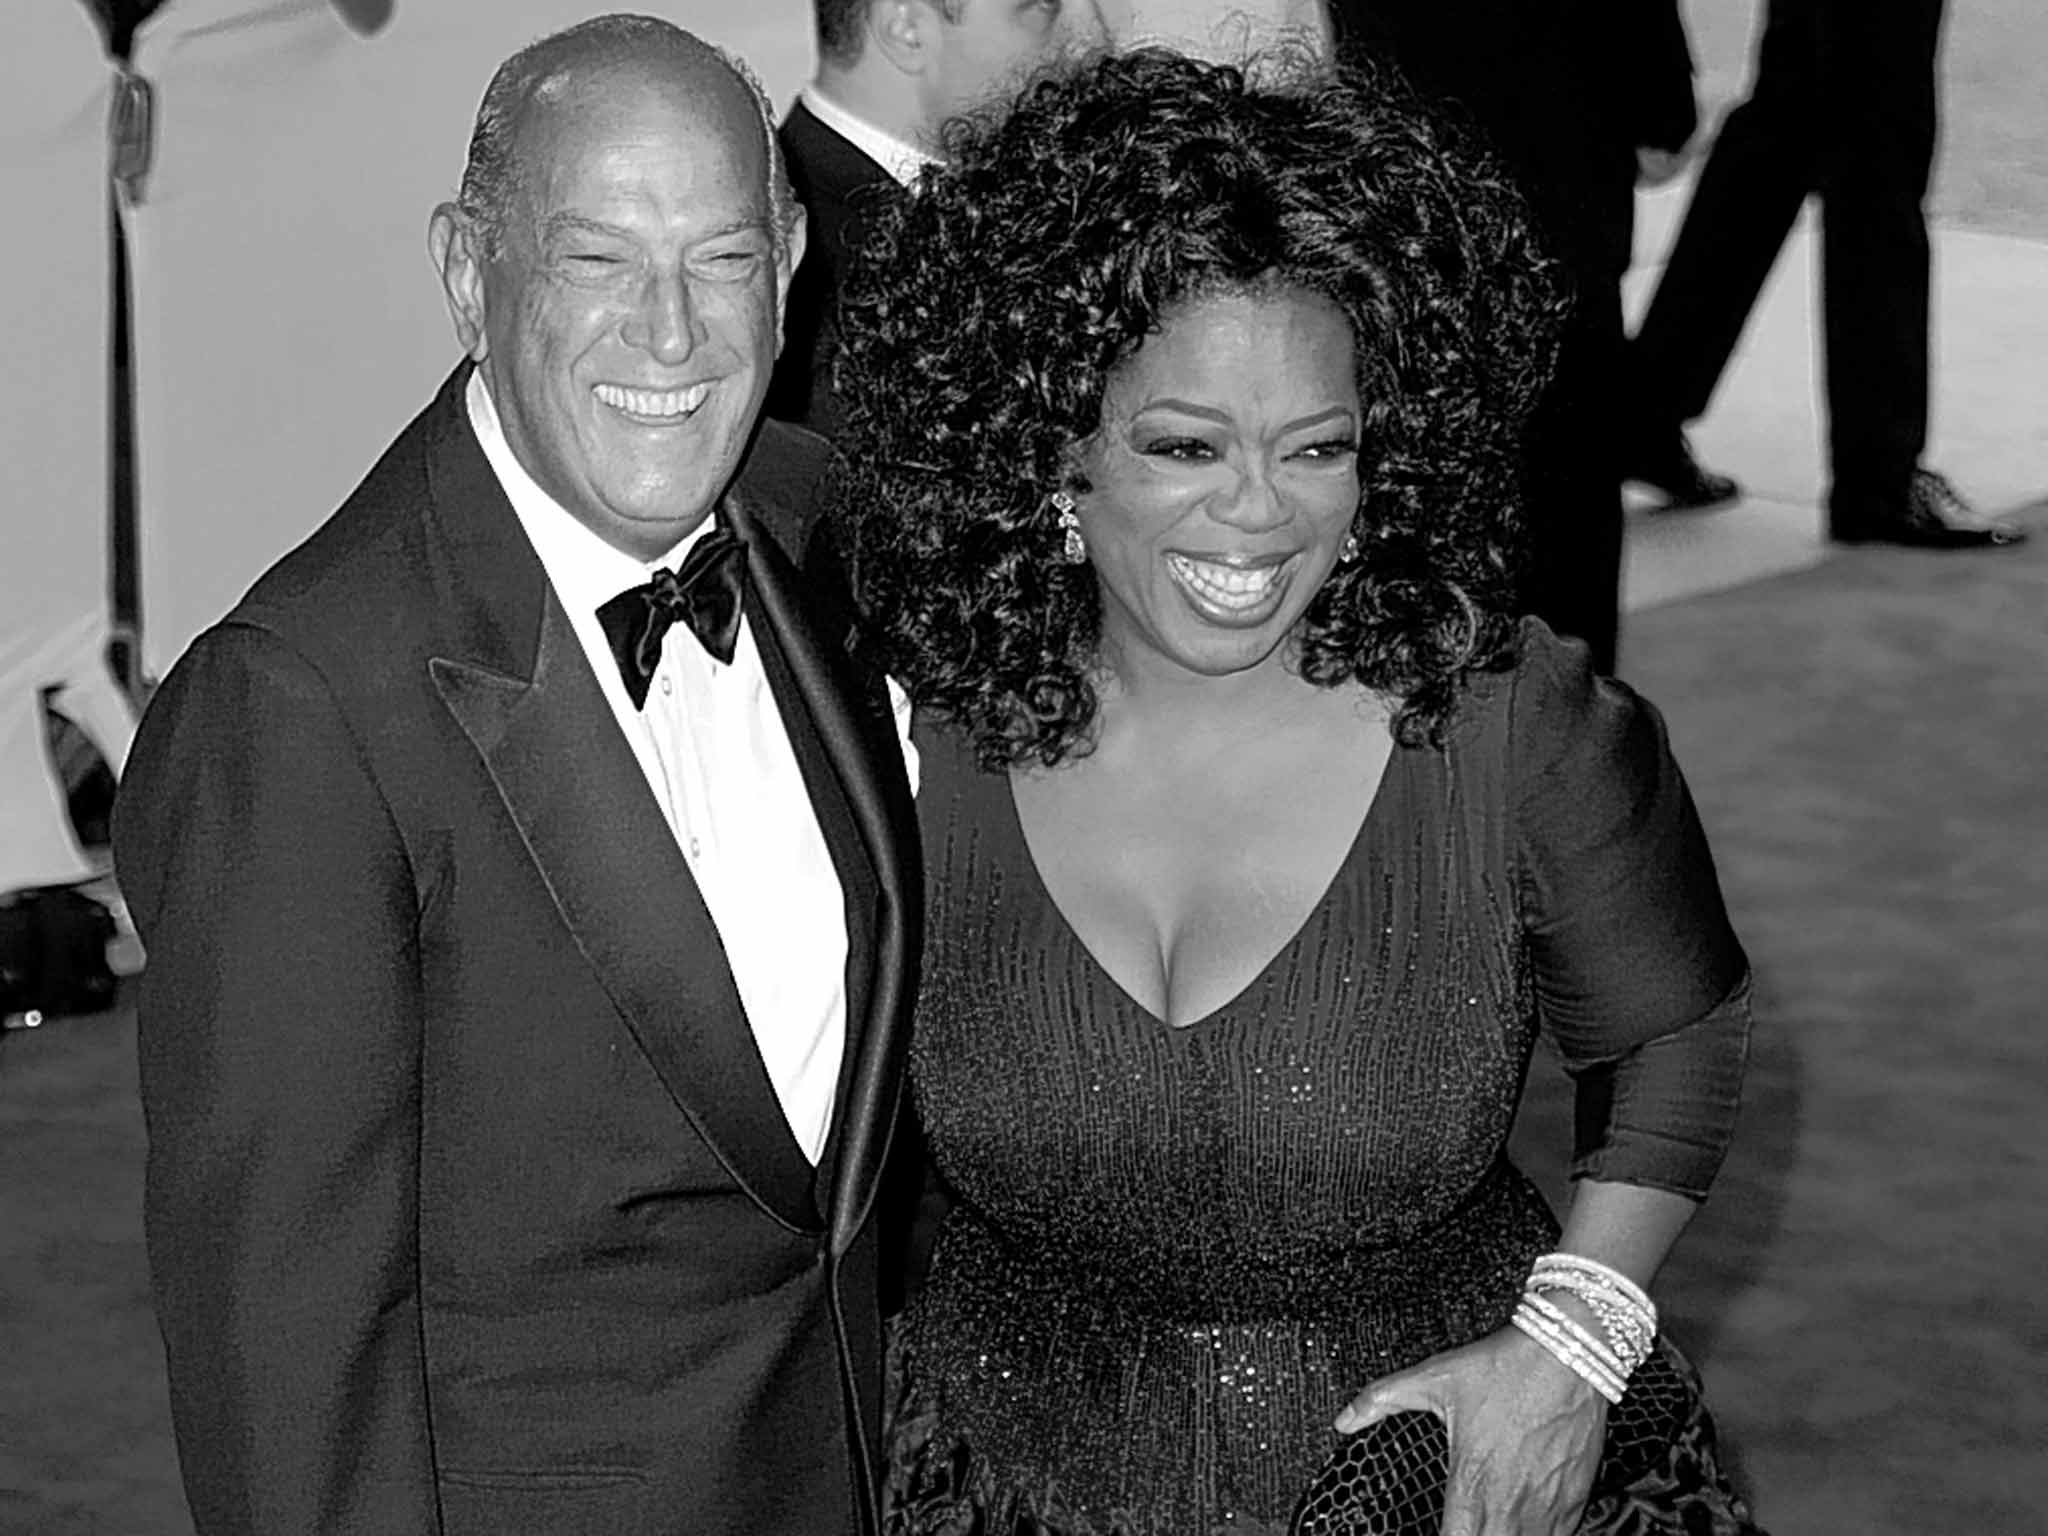 De la Renta with Oprah Winfrey at a benefit gala in 2010; he assiduously networked among America's elite